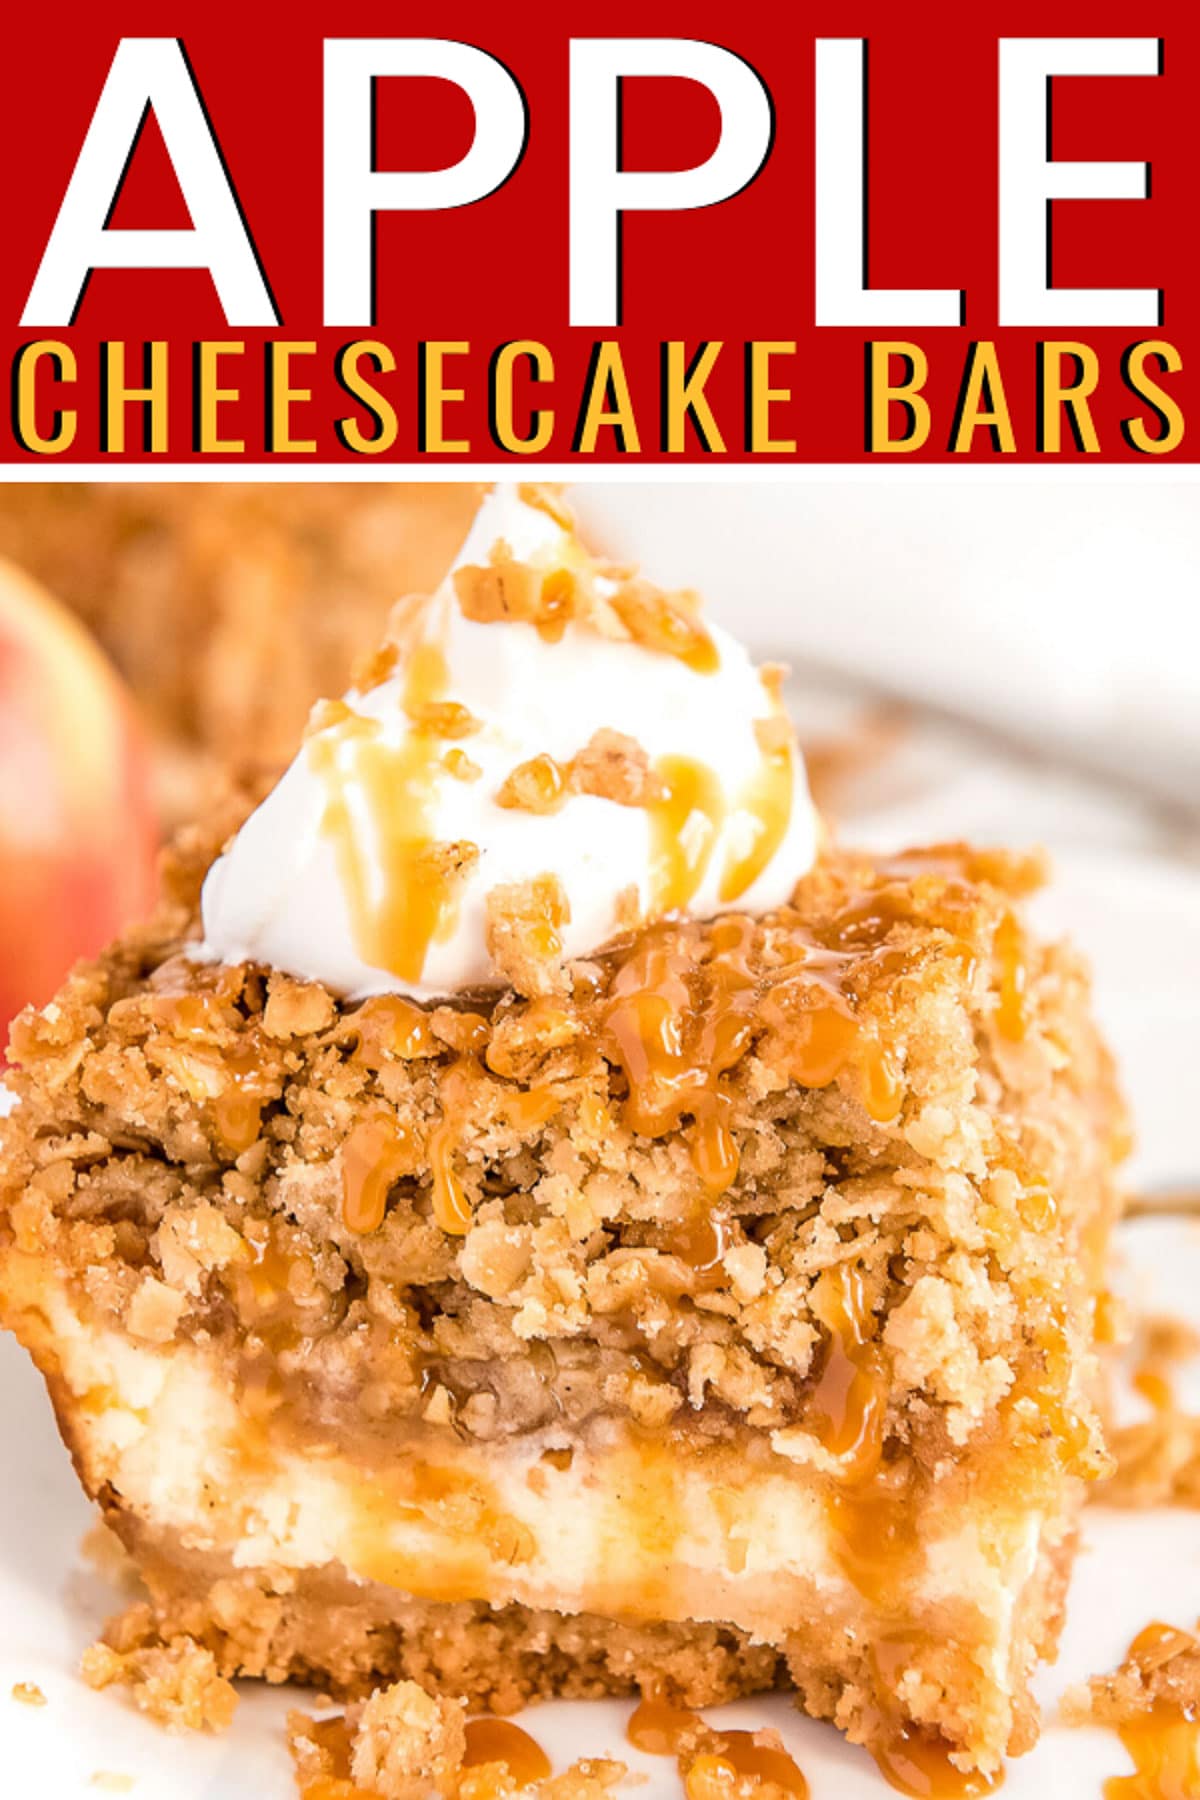 Caramel Apple Cheesecake Bars are made with a shortbread crust, a creamy cheesecake layer, cinnamon baked apples, and an oatmeal crumble topping! via @sugarandsoulco